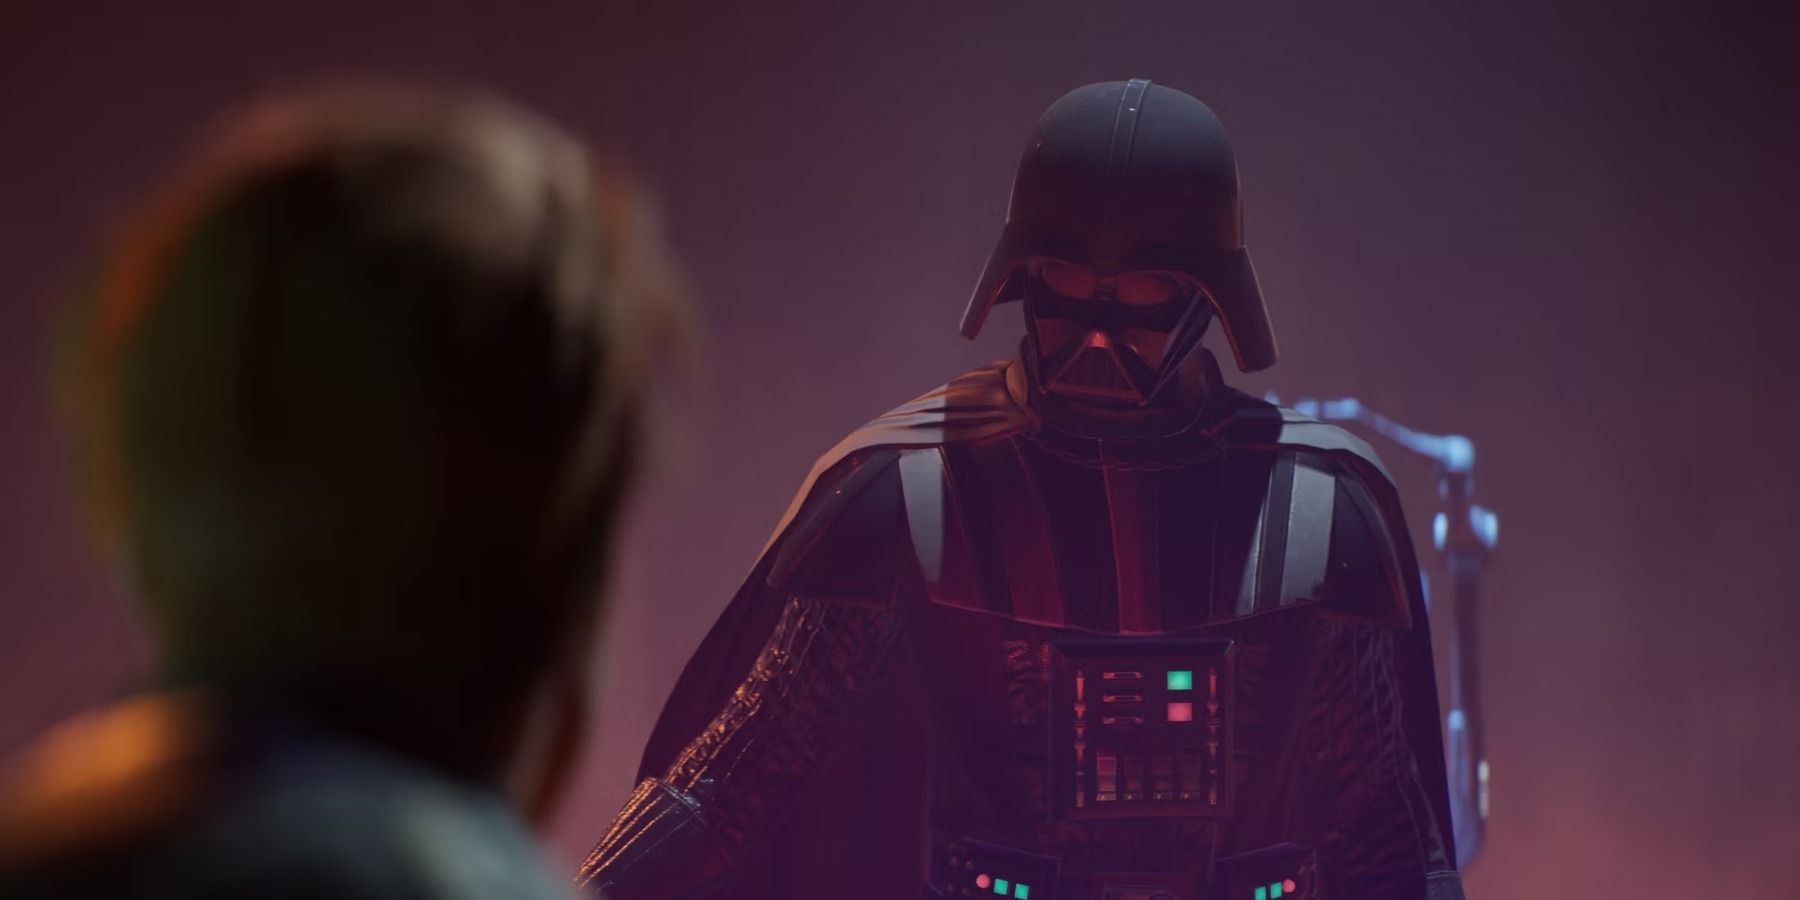 The Star Wars Jedi Games Need to Get Over Their Dependence on Darth Vader